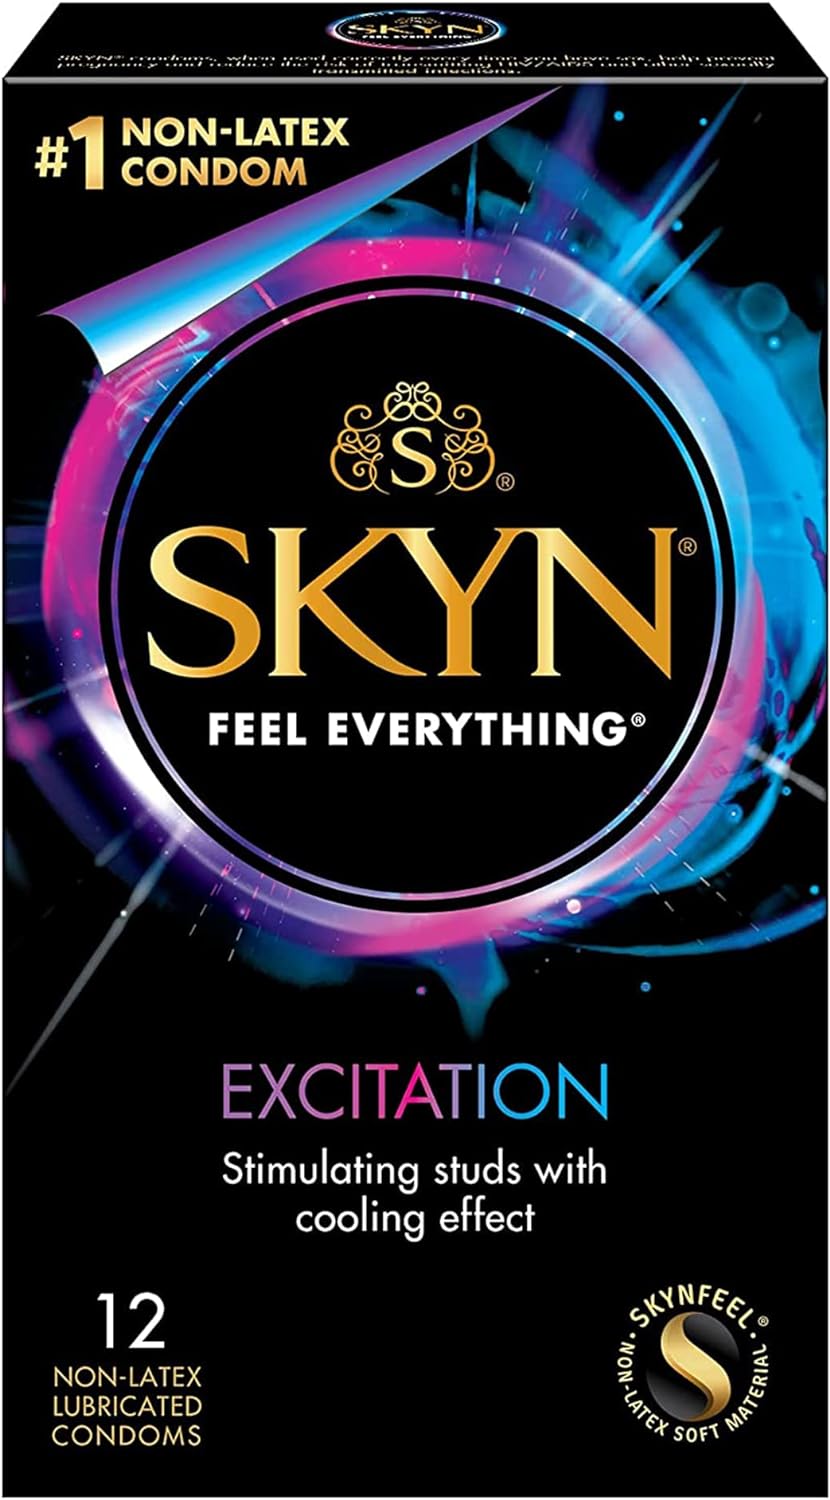 SKYN Excitation Condom Review